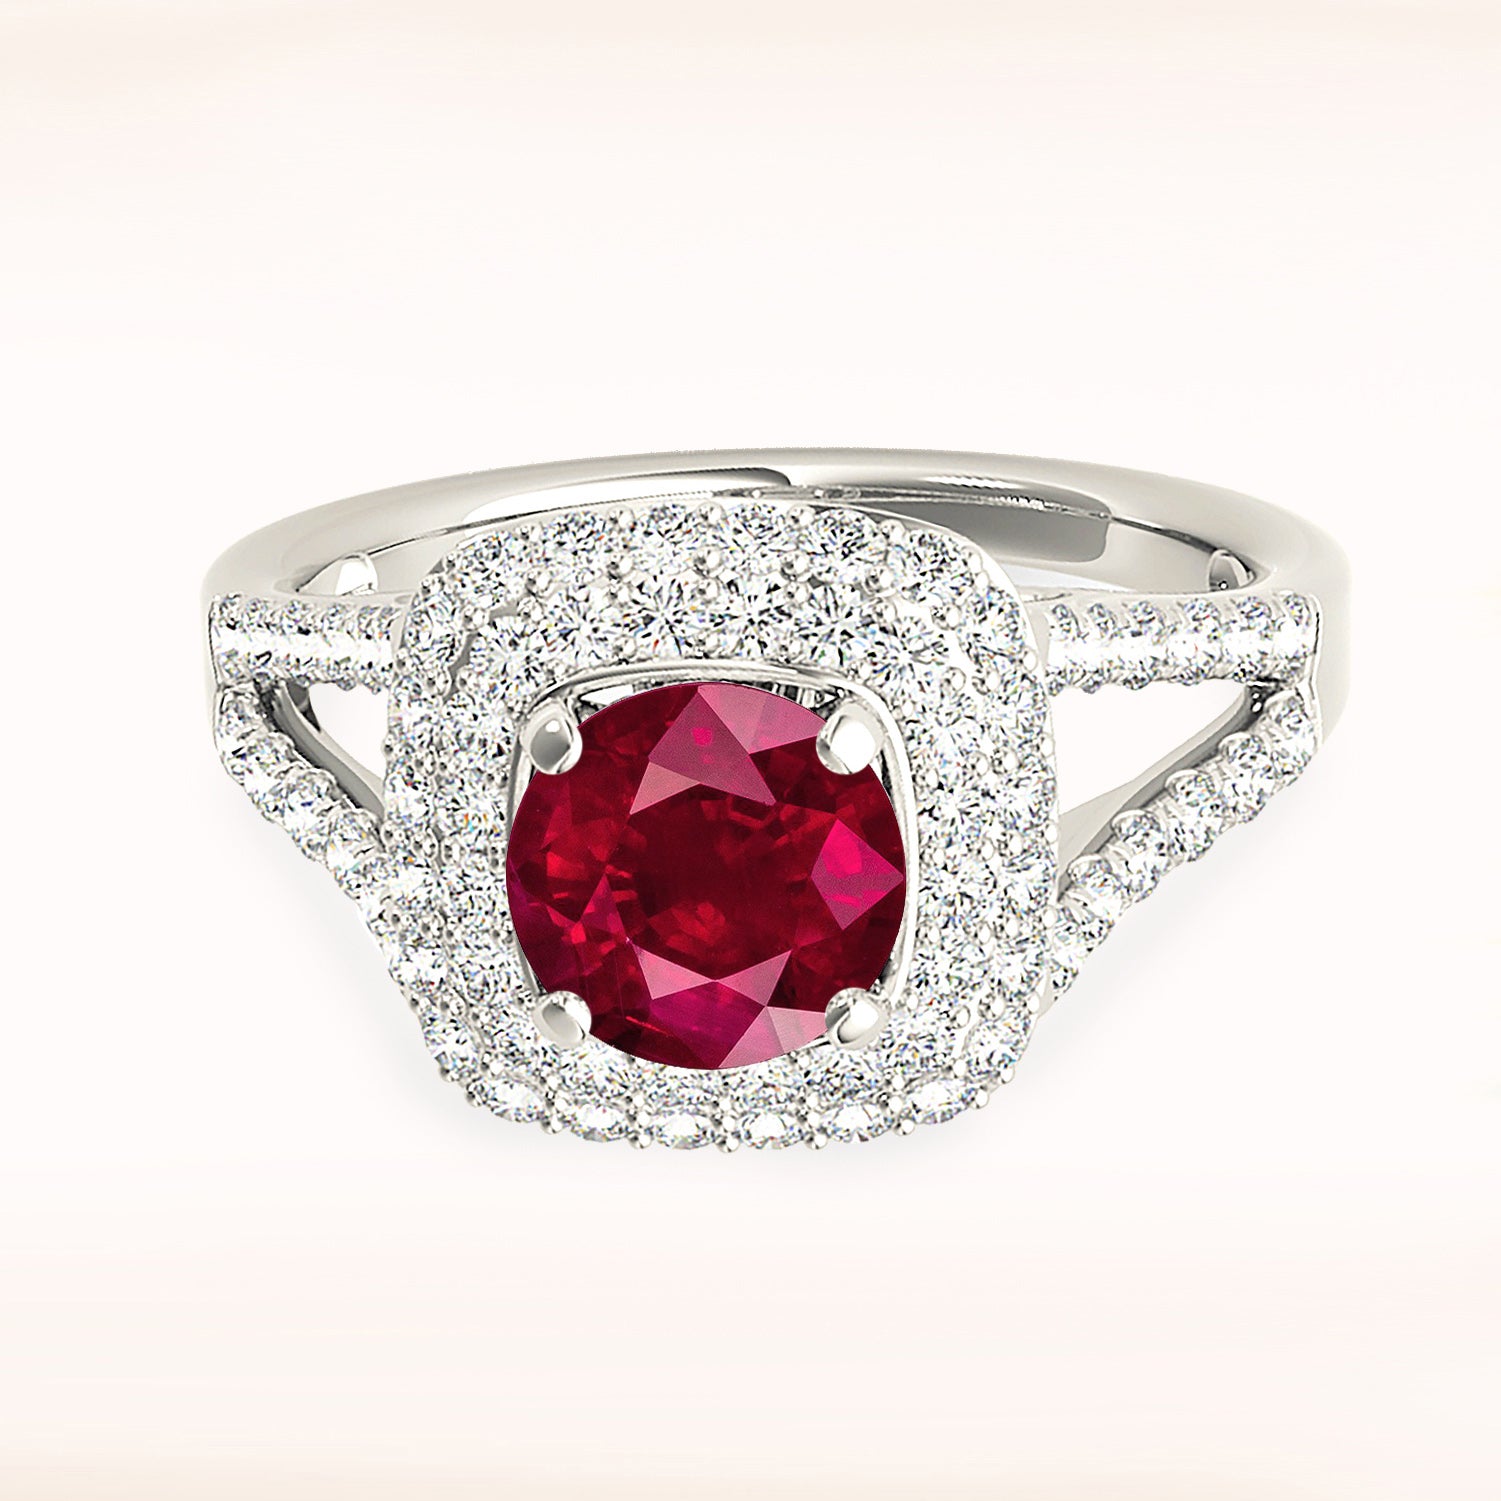 1.35 ct. Genuine Ruby Ring with 0.70 ctw. Diamond Double Row Halo And Split V Diamond Shank-in 14K/18K White, Yellow, Rose Gold and Platinum - Christmas Jewelry Gift -VIRABYANI